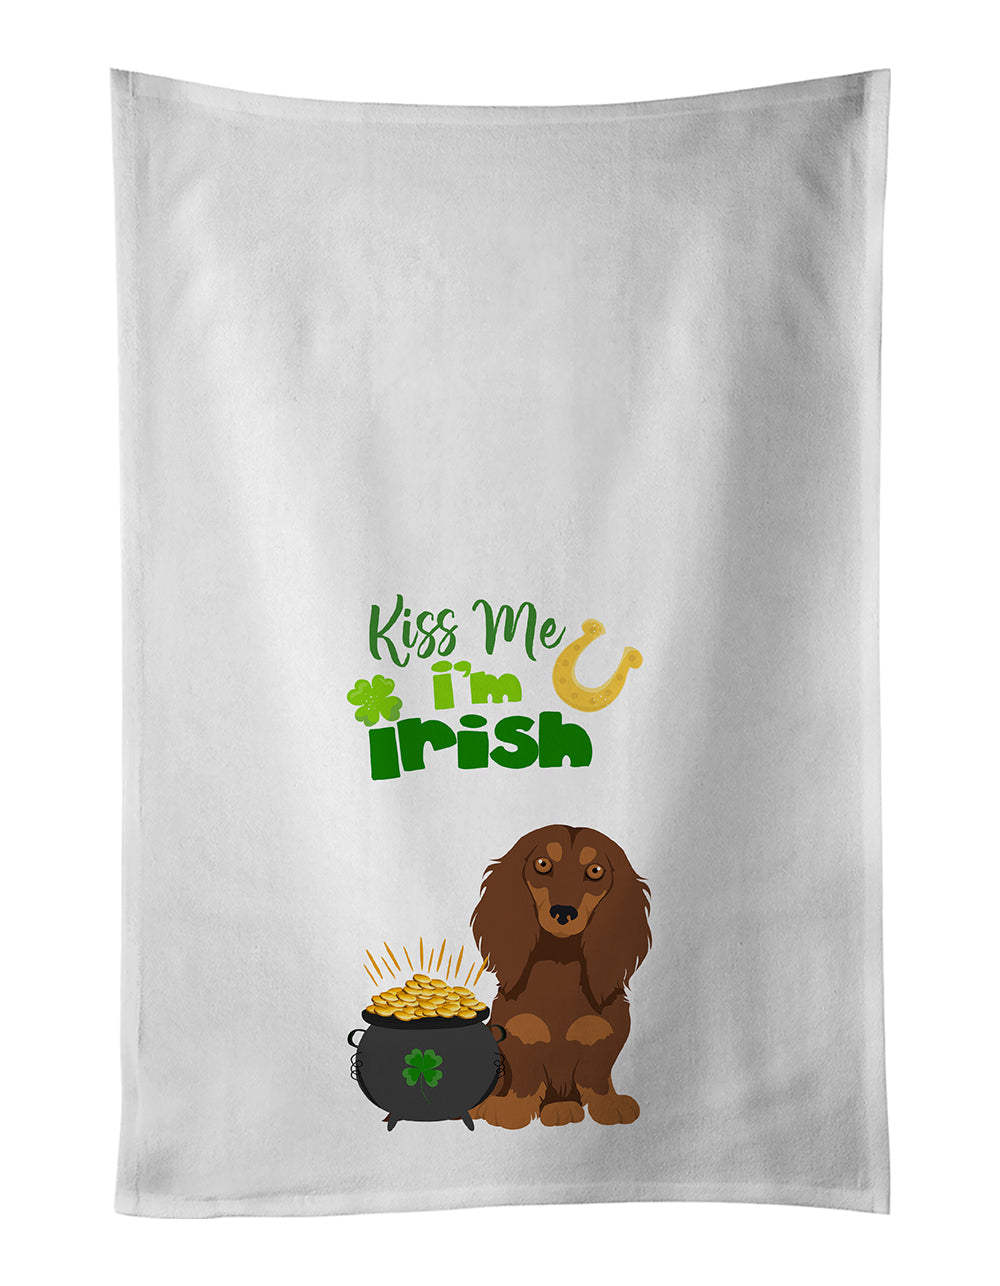 Buy this Longhair Chocolate and Tan Dachshund St. Patrick's Day White Kitchen Towel Set of 2 Dish Towels